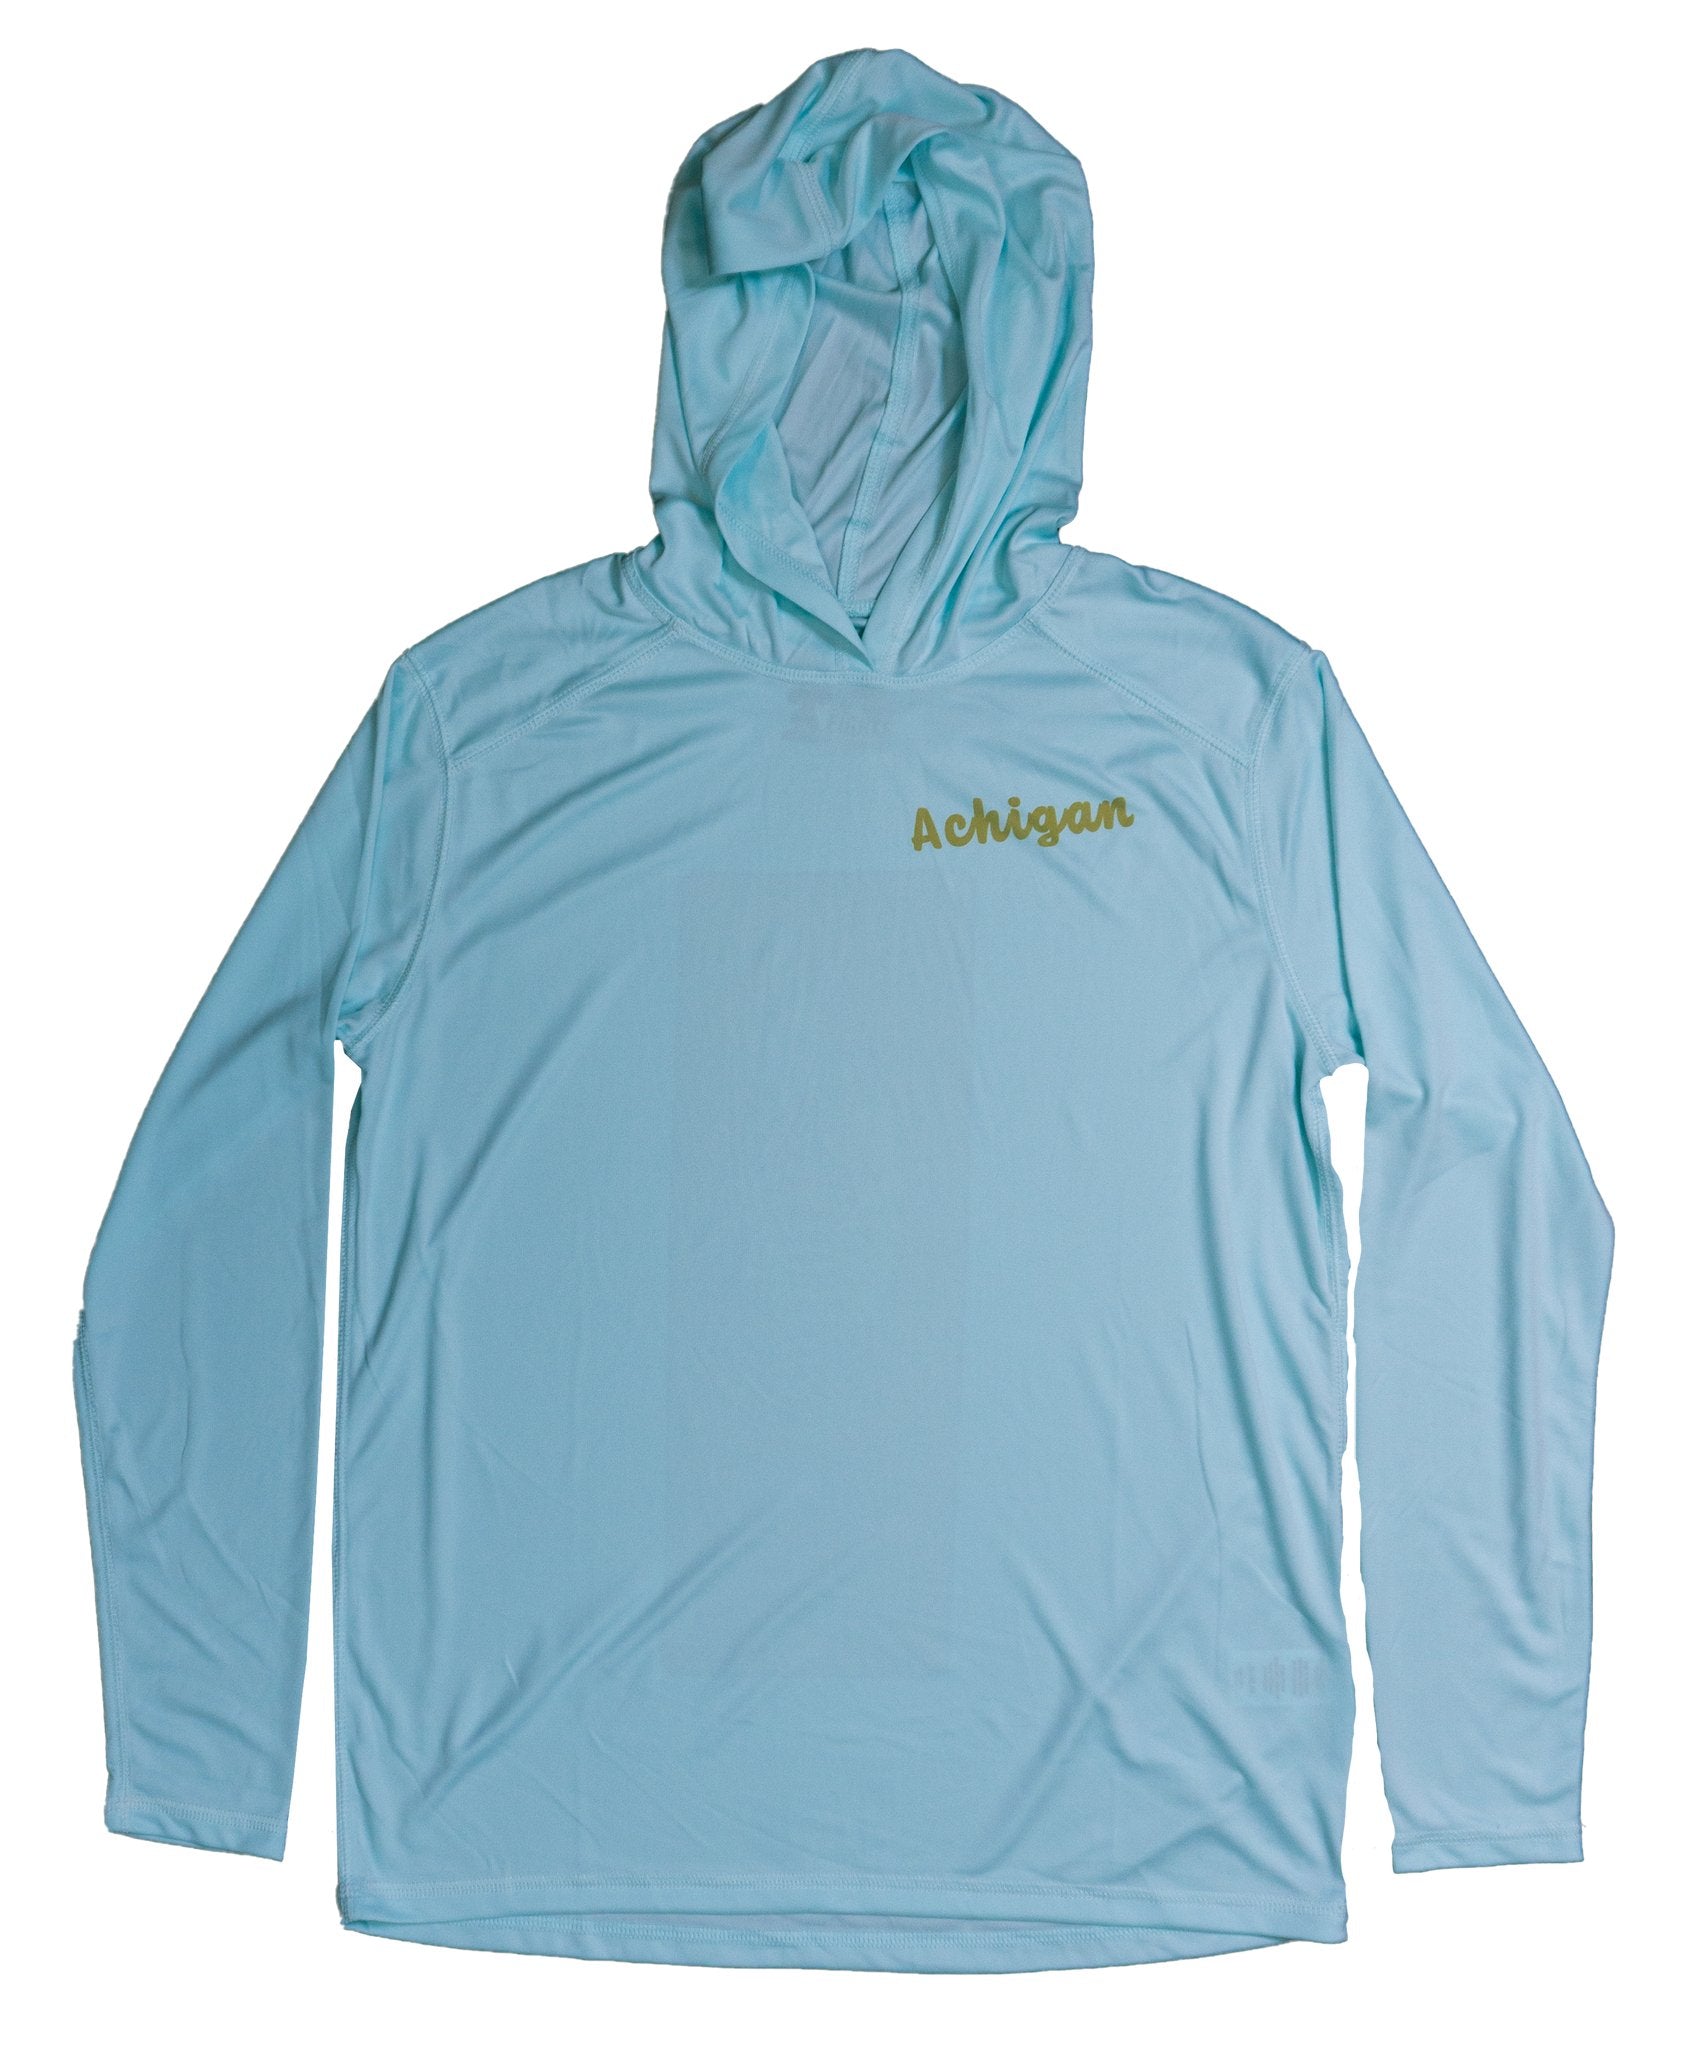 Achigan Order of the Bronze Sun Hoodie - Hamilton Bait and Tackle